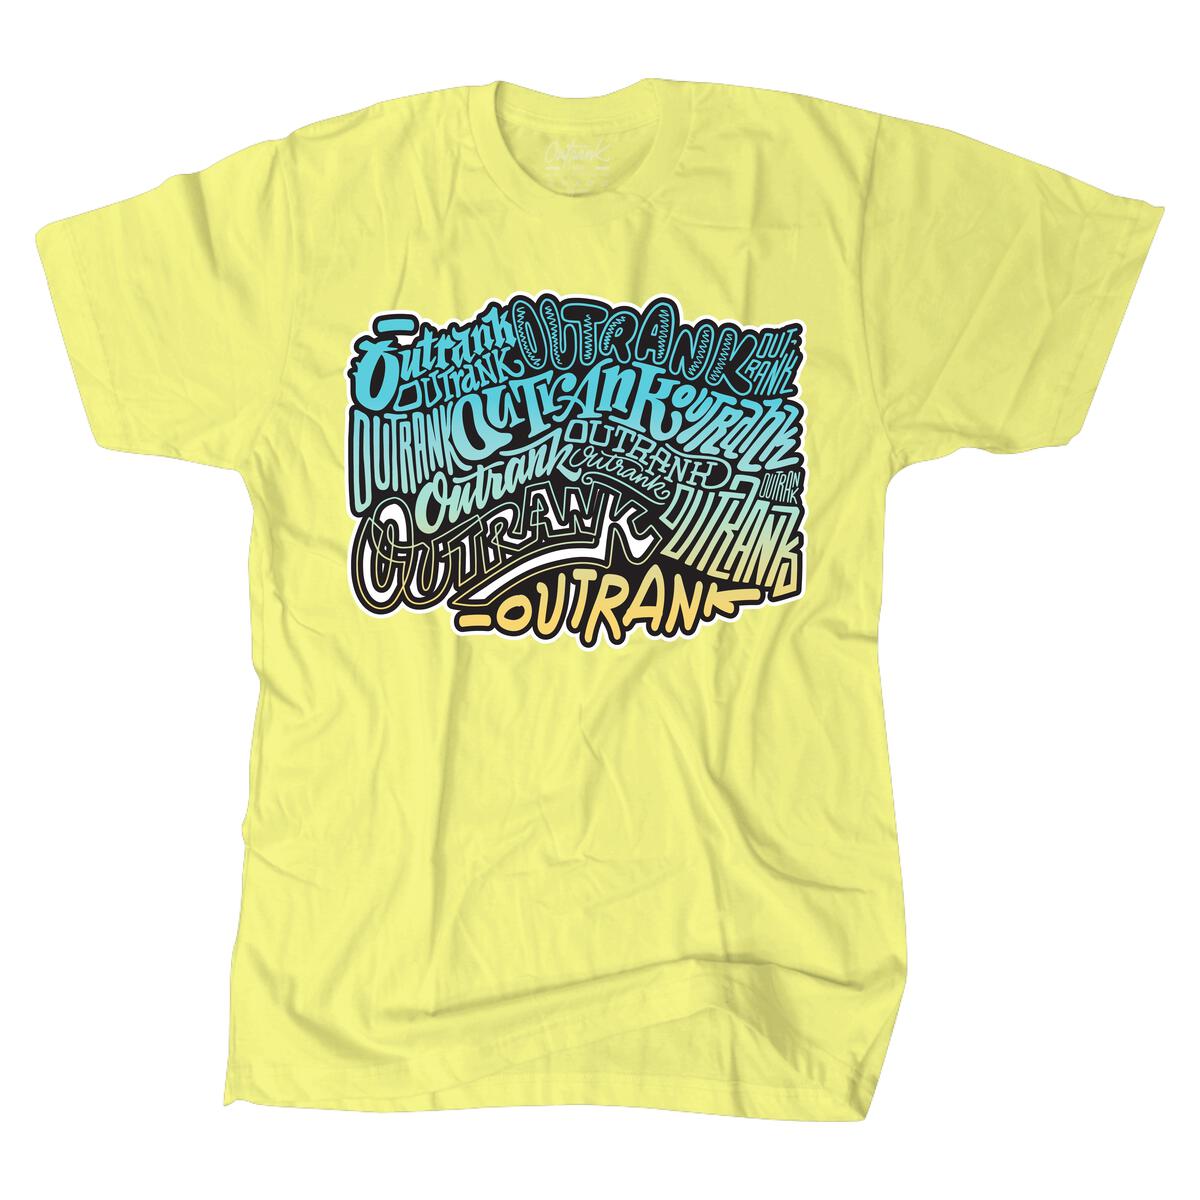 Faded T-shirt - Yellow